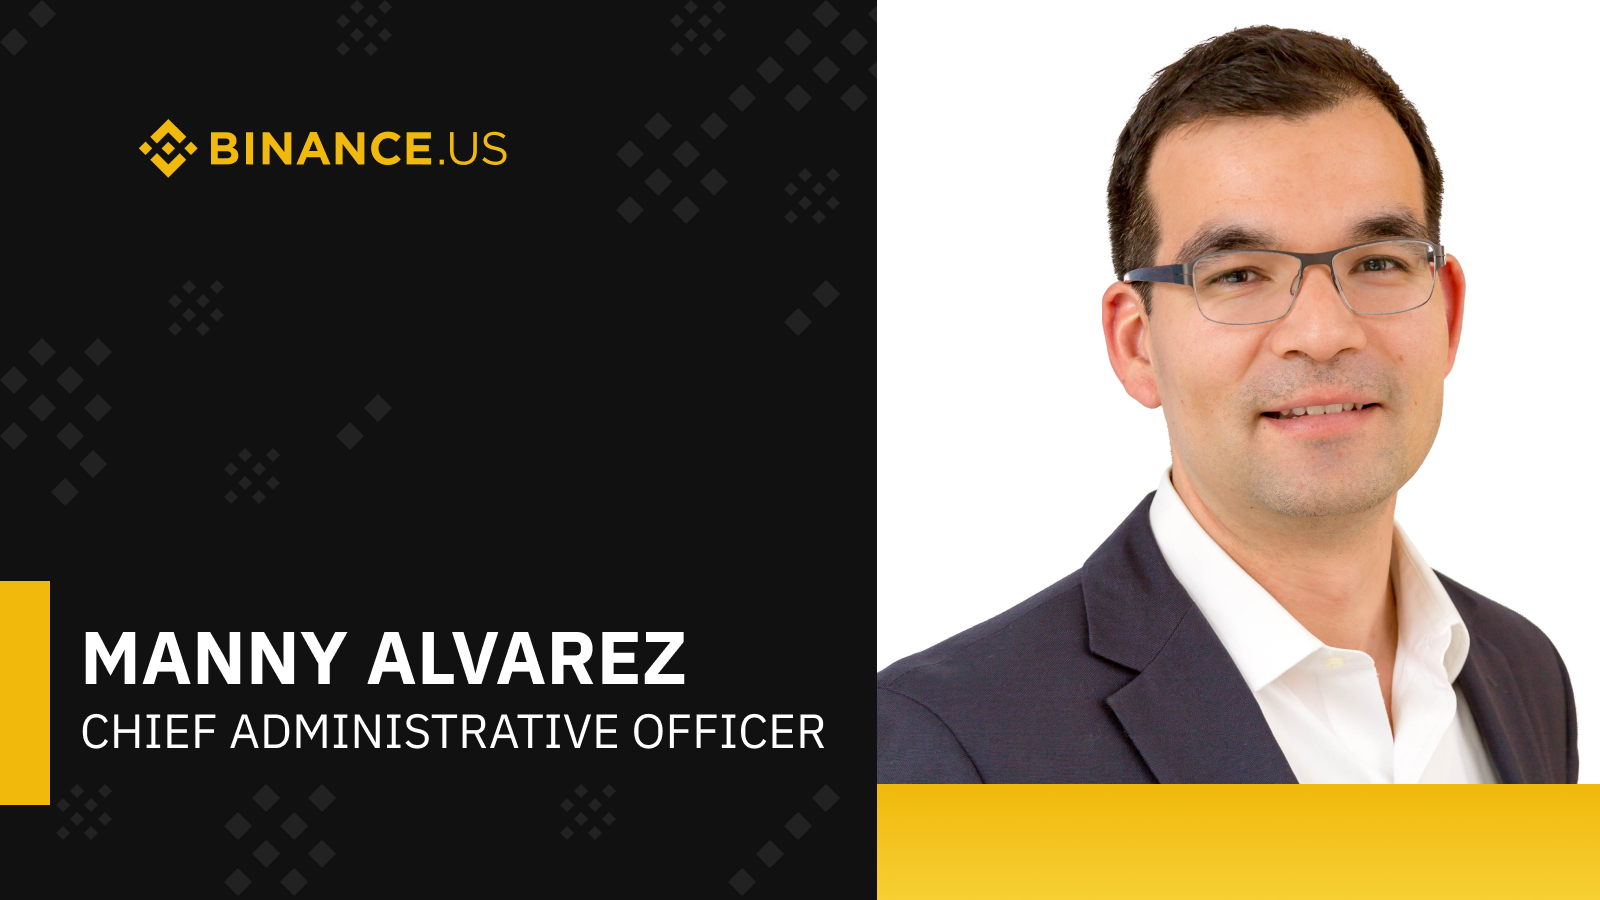 Manny Alvarez to Join Binance.US as Chief Administrative Officer